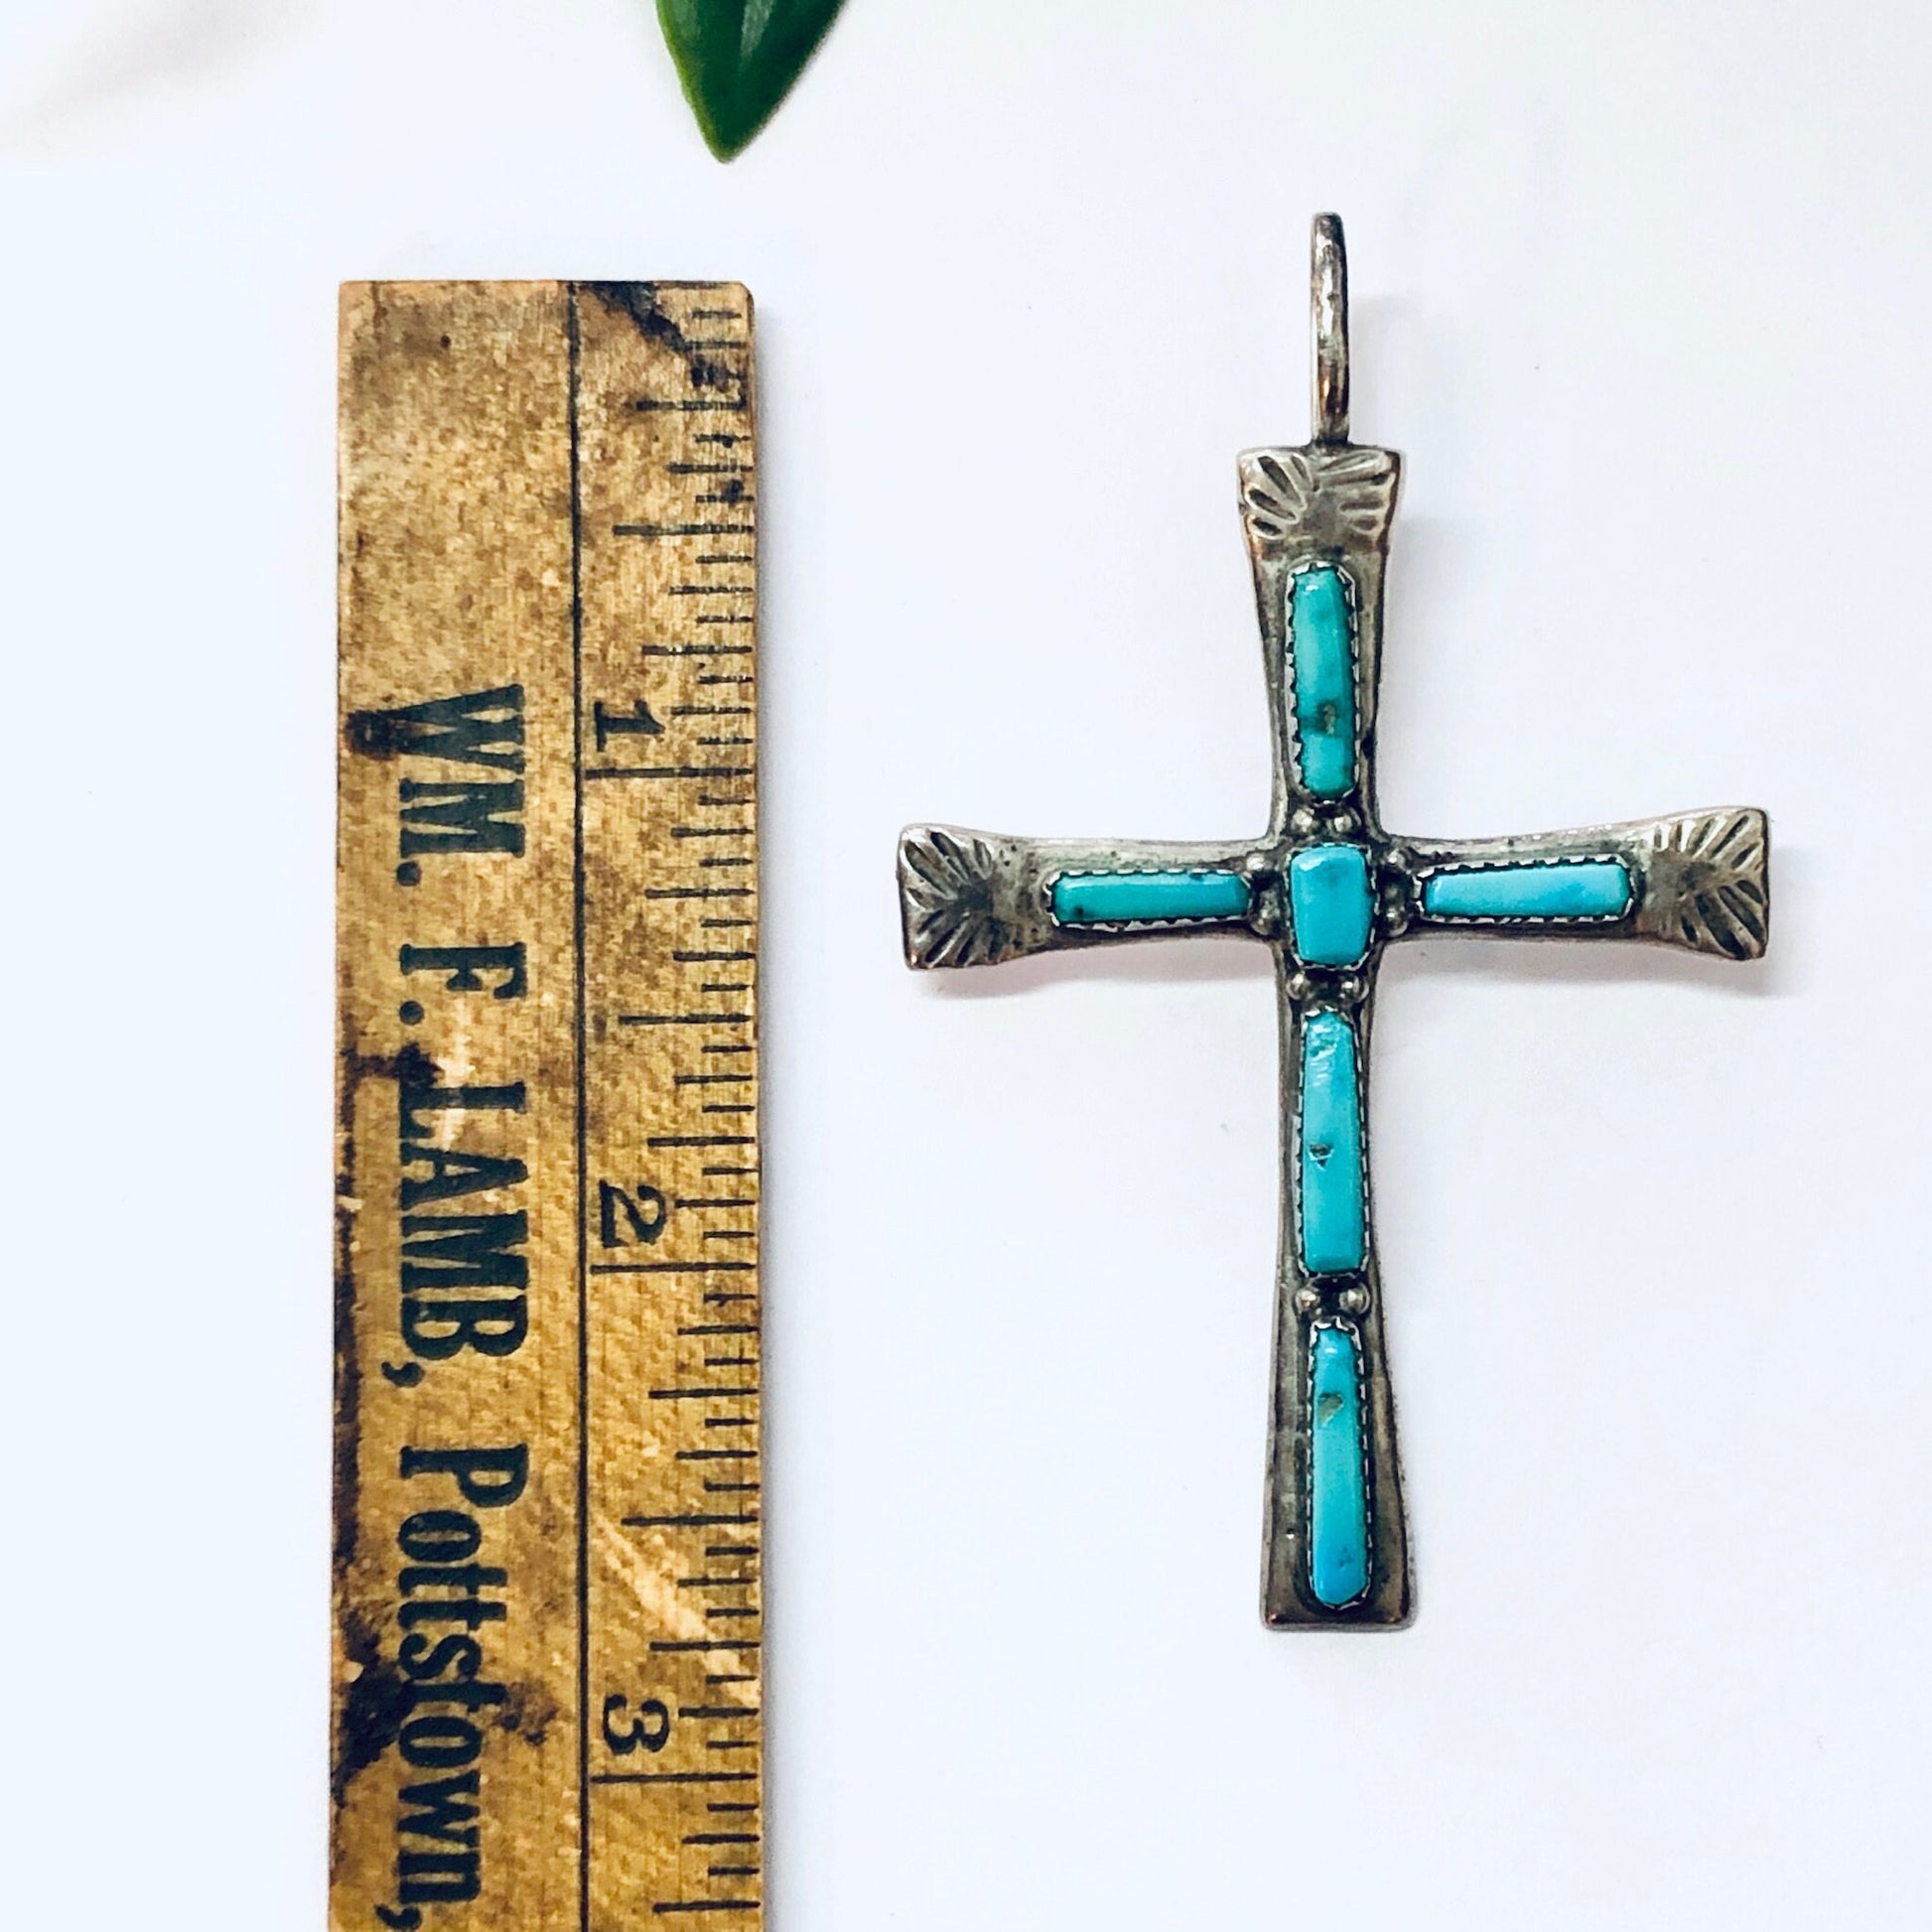 Vintage Zuni silver turquoise cross pendant - Native American religious jewelry from L IULE, 925 silver and turquoise inlay, antique Southwest style cross necklace charm